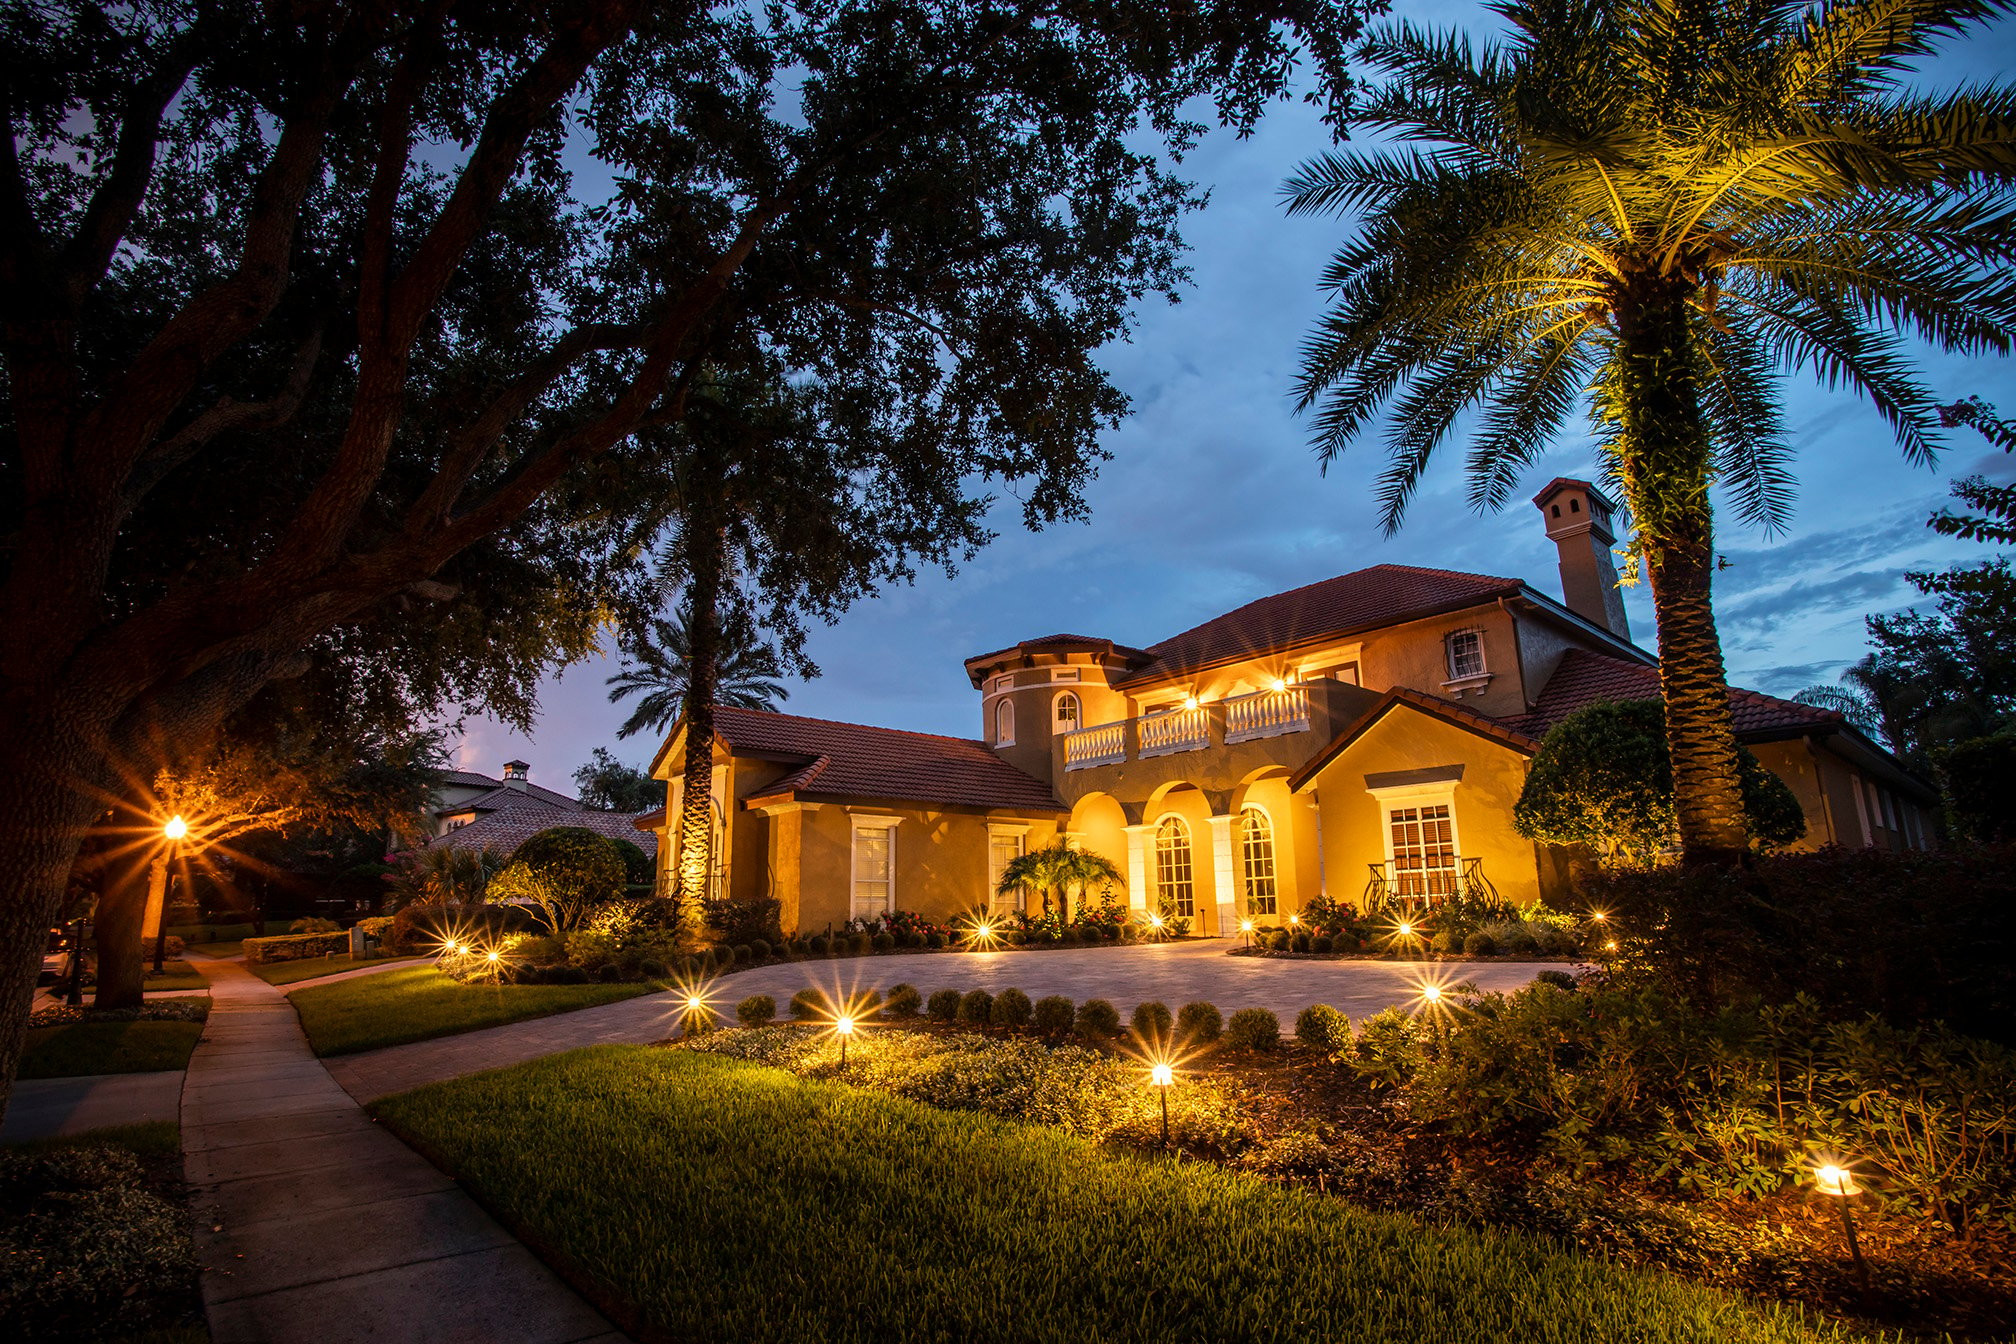 All About Landscape Lighting: Ideas, Mistakes, Costs, & More